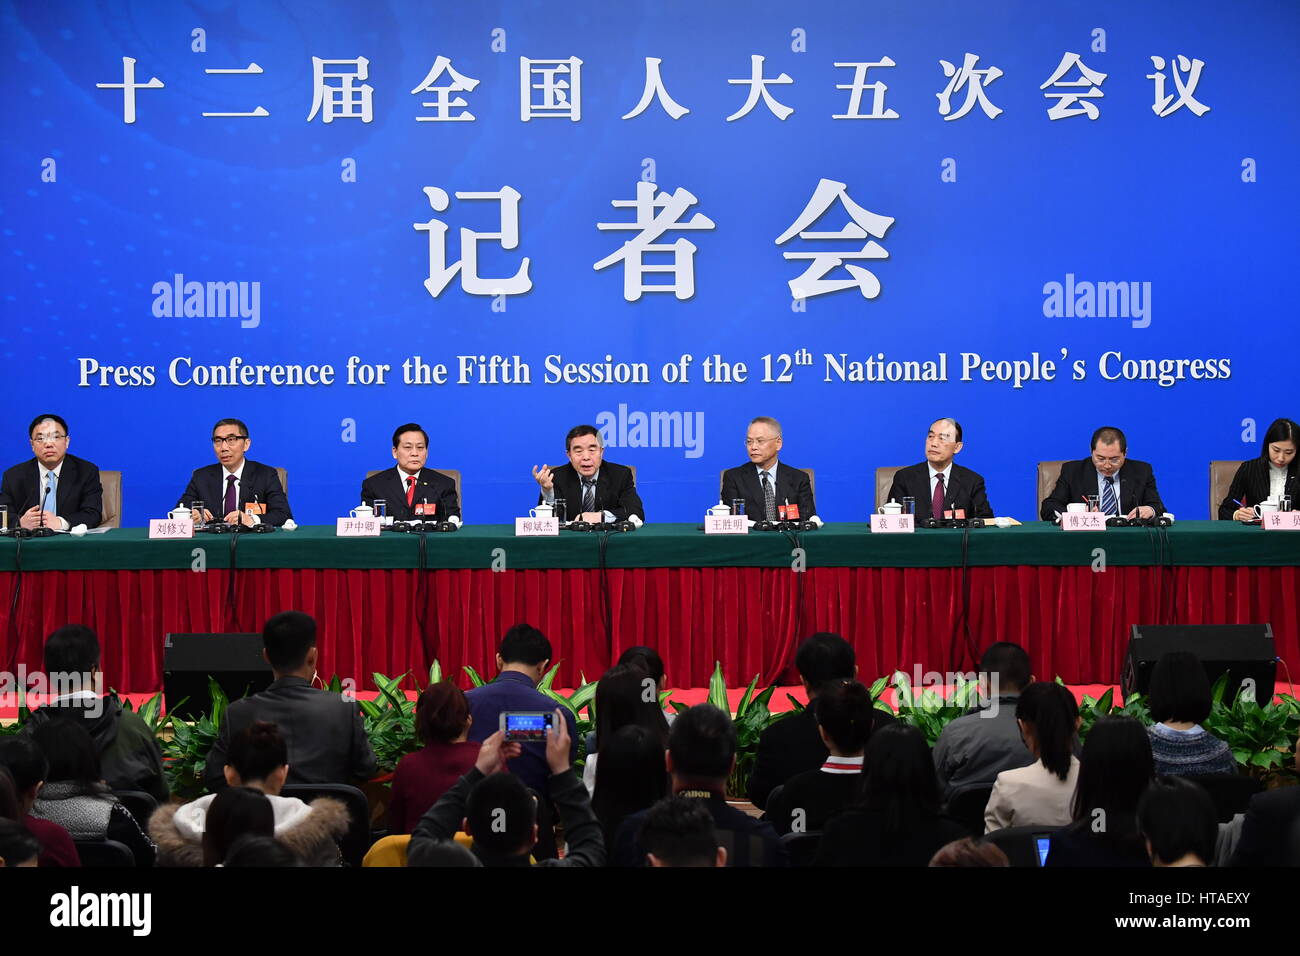 Beijing, China. 10th Mar, 2017. Liu Binjie, chairman of the Education, Science, Culture and Public Health Committee of the National People?s Congress (NPC), Wang Shengming, vice-chairman of Internal and Judicial Affairs Committee of the NPC, Yin Zhongqing, vice-chairman of Financial and Economic Affairs Committee of the NPC, Yuan Si, vice-chairman of the Environment Protection and Resources Conservation Committee of the NPC, Liu Xiuwen, deputy director of the Budgetary Affairs Commission of the NPC Standing Committee and Fu Wenjie, inspector of the Bureau of Secretaries of the Stock Photo